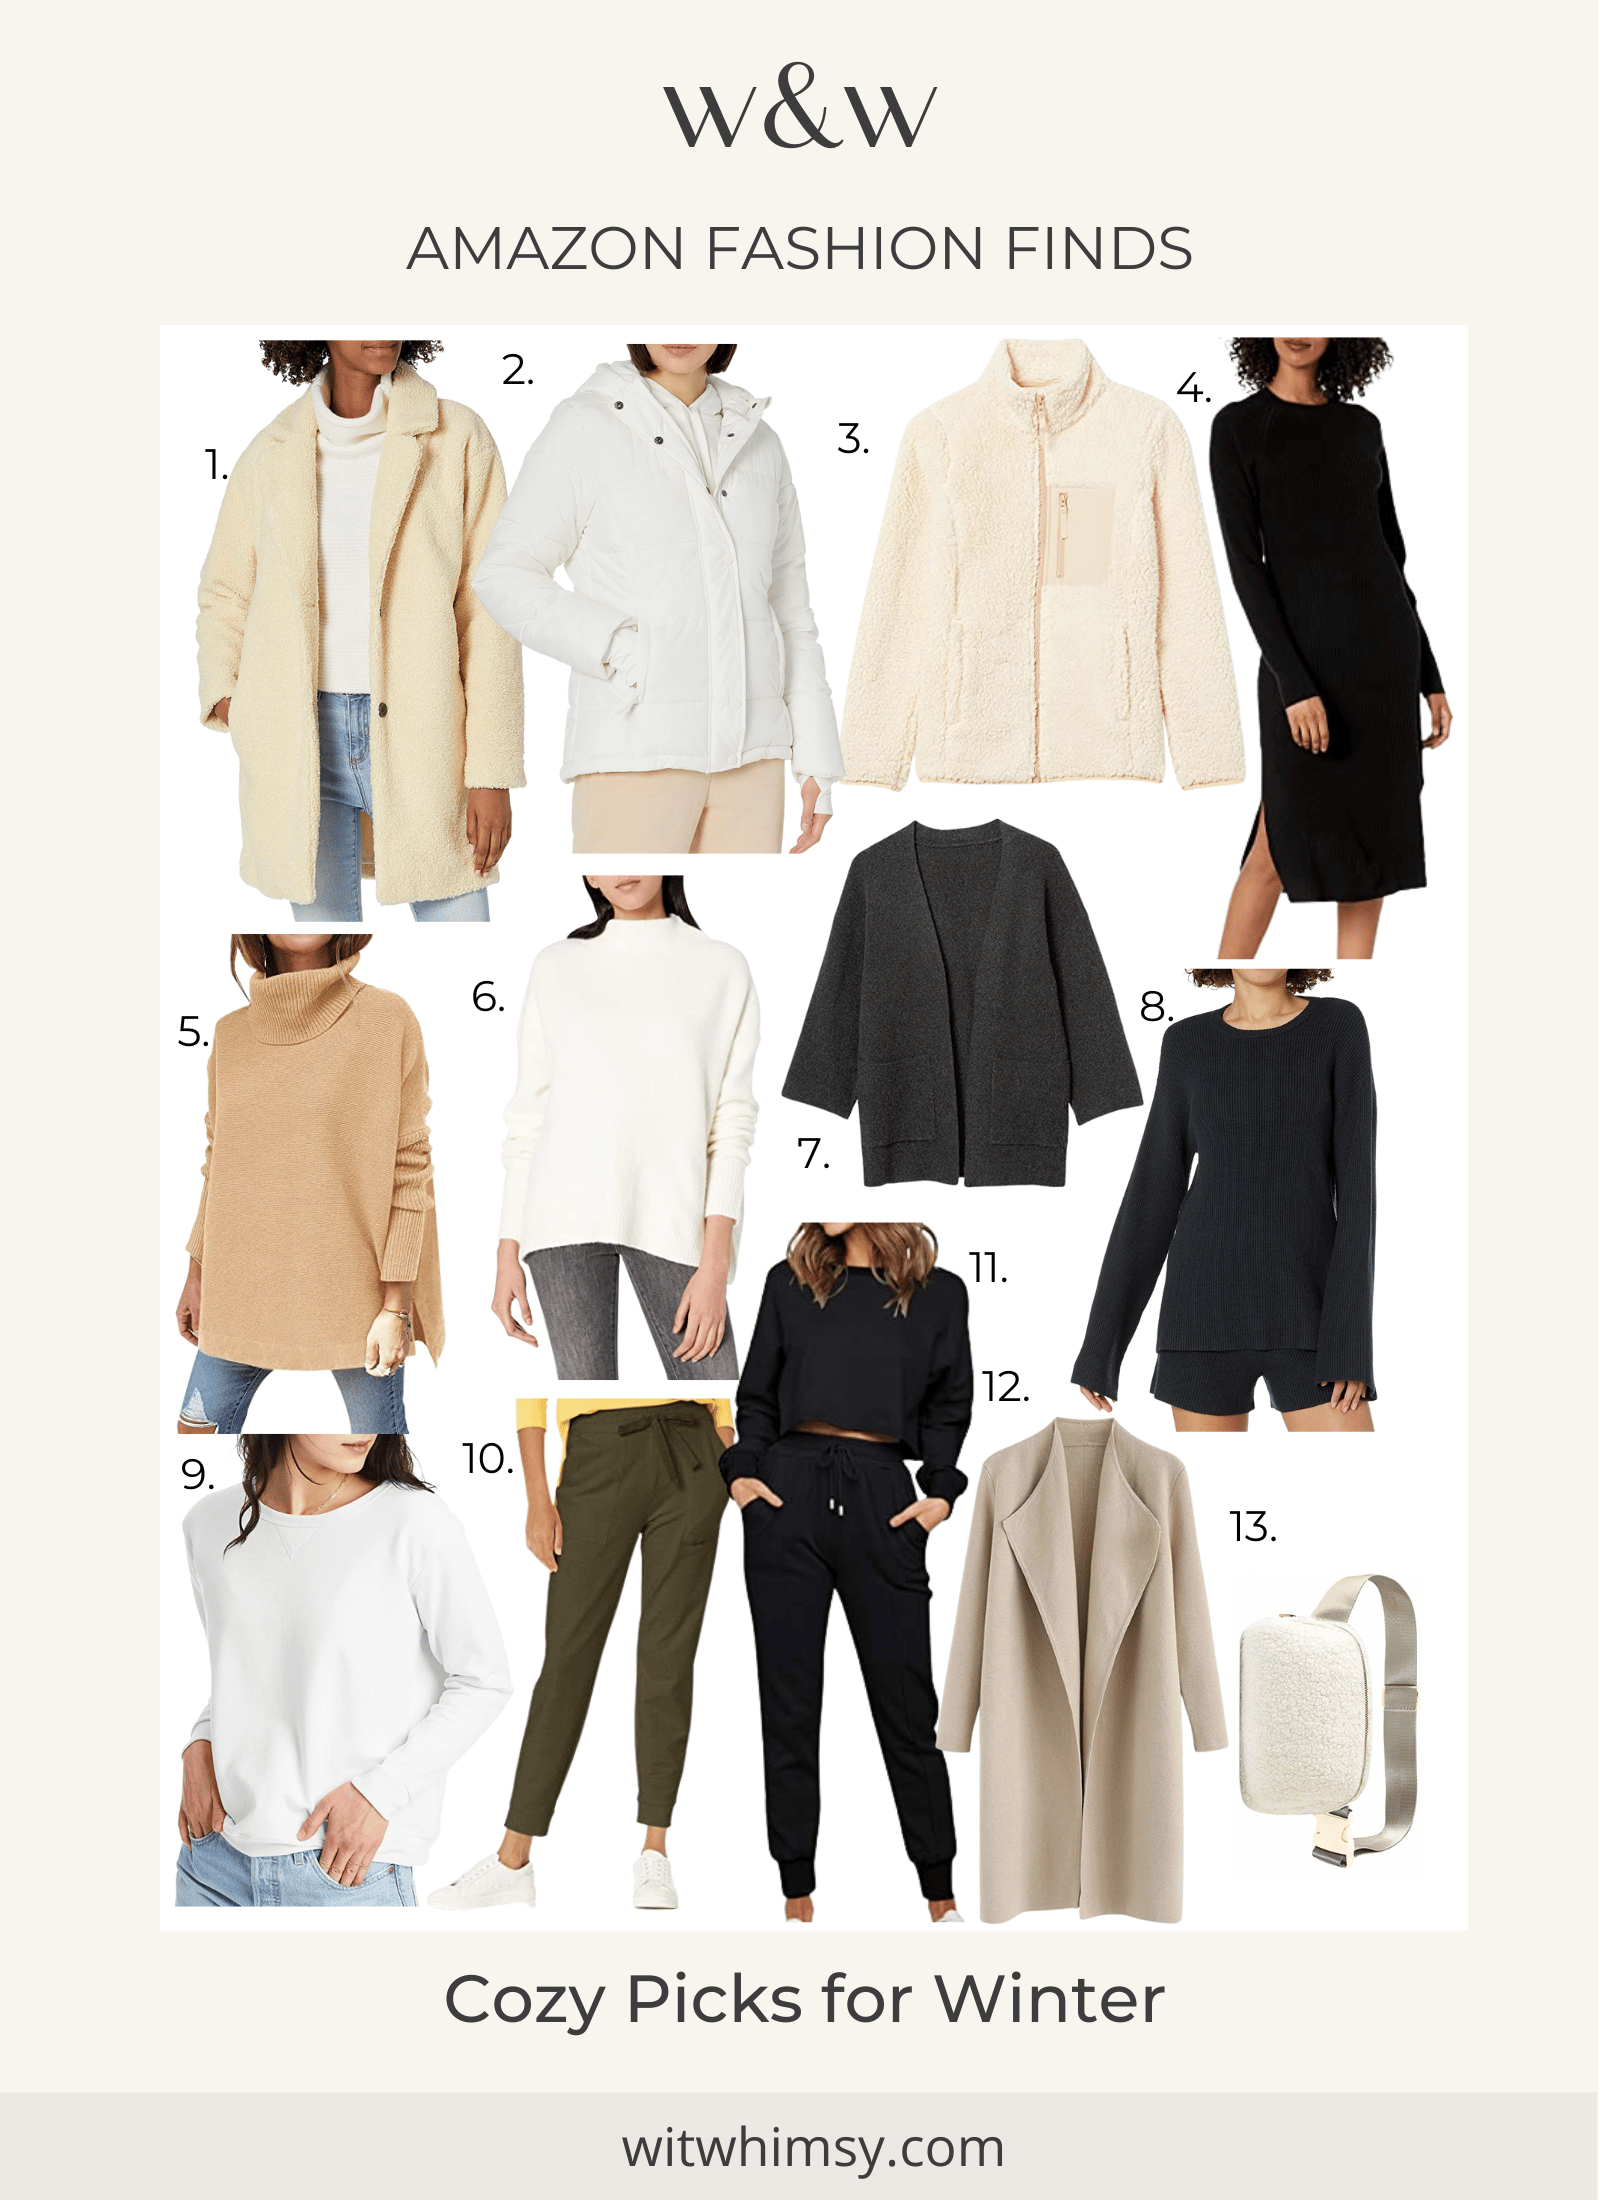 Amazon Fashion Finds for Winter